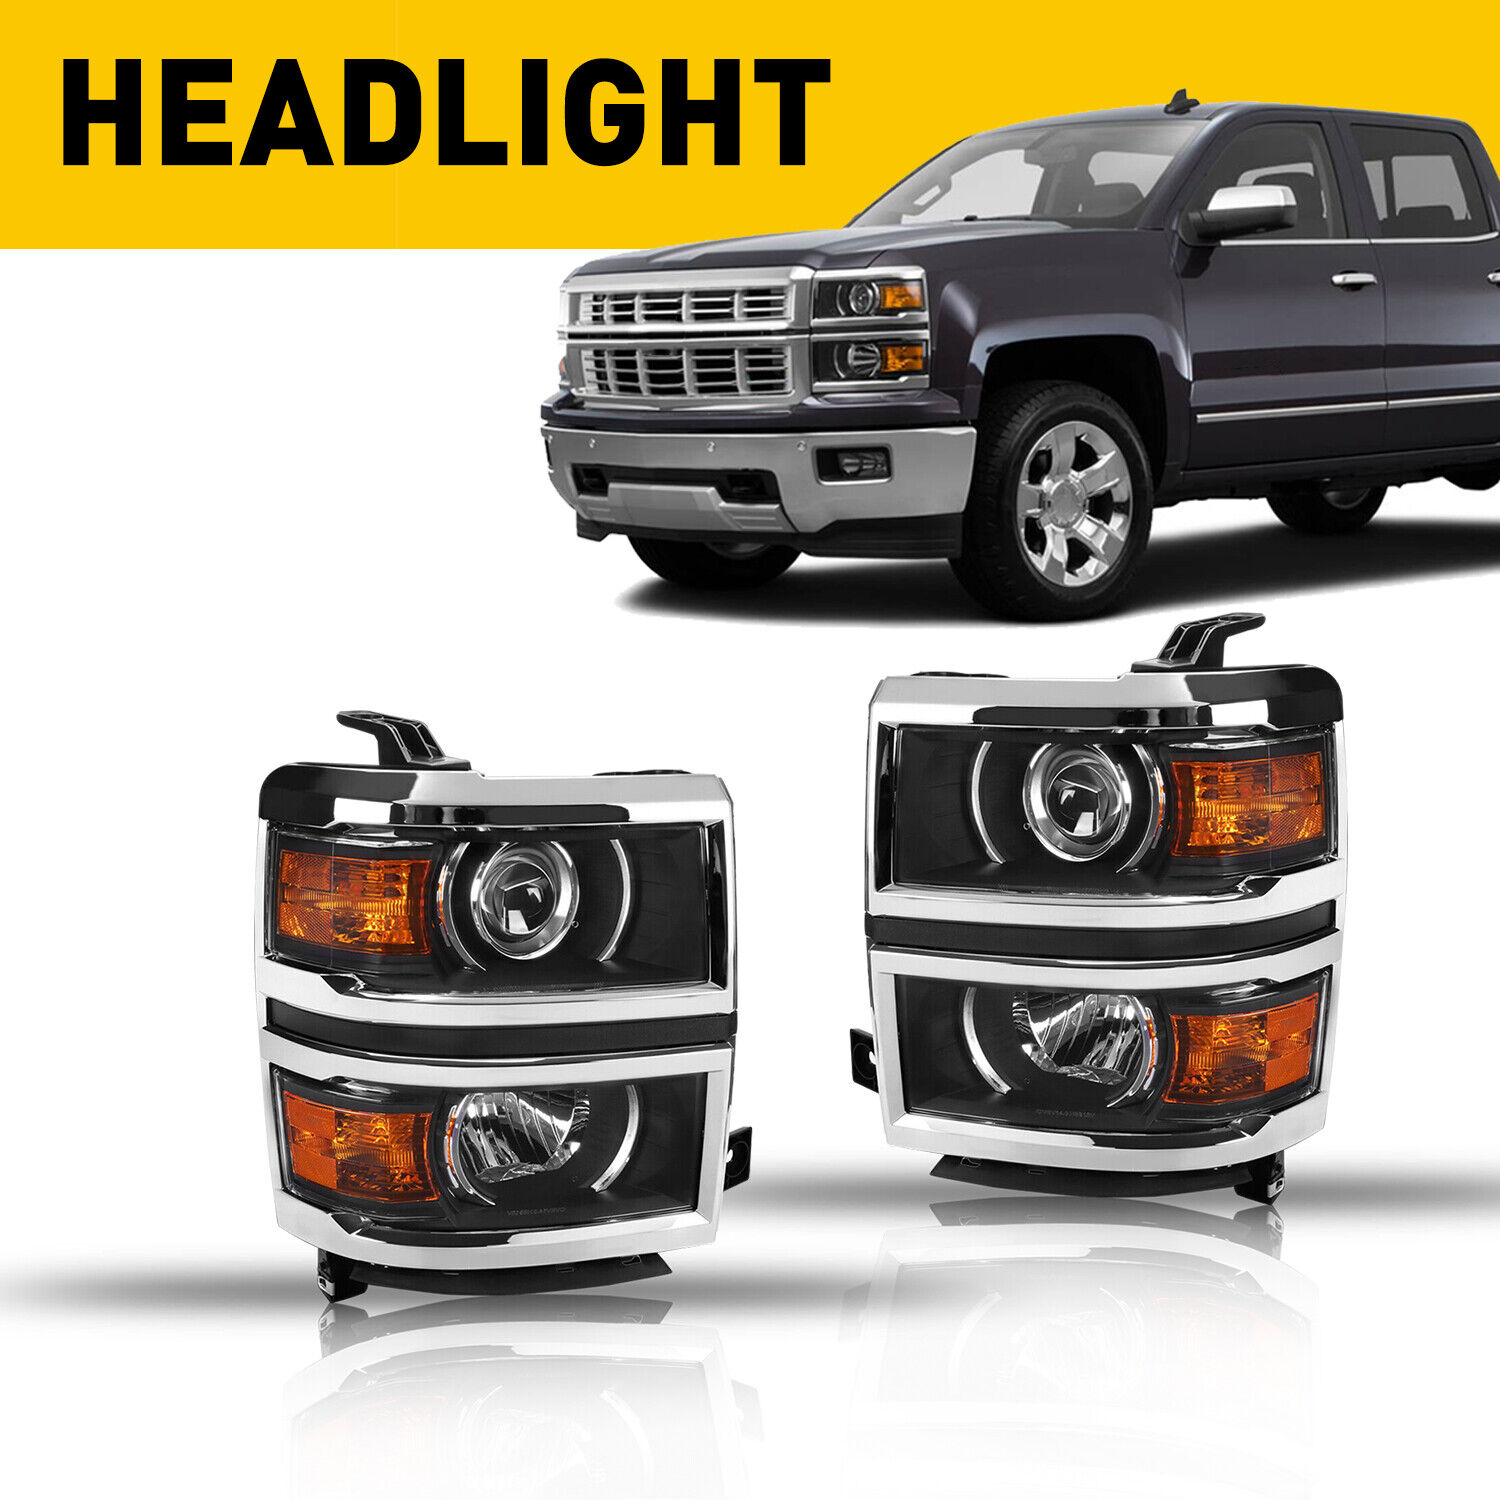 ONE PAIR Amber Projector Headlight Lamp LH RH For 2014-2015 Chevy Silverado 1500